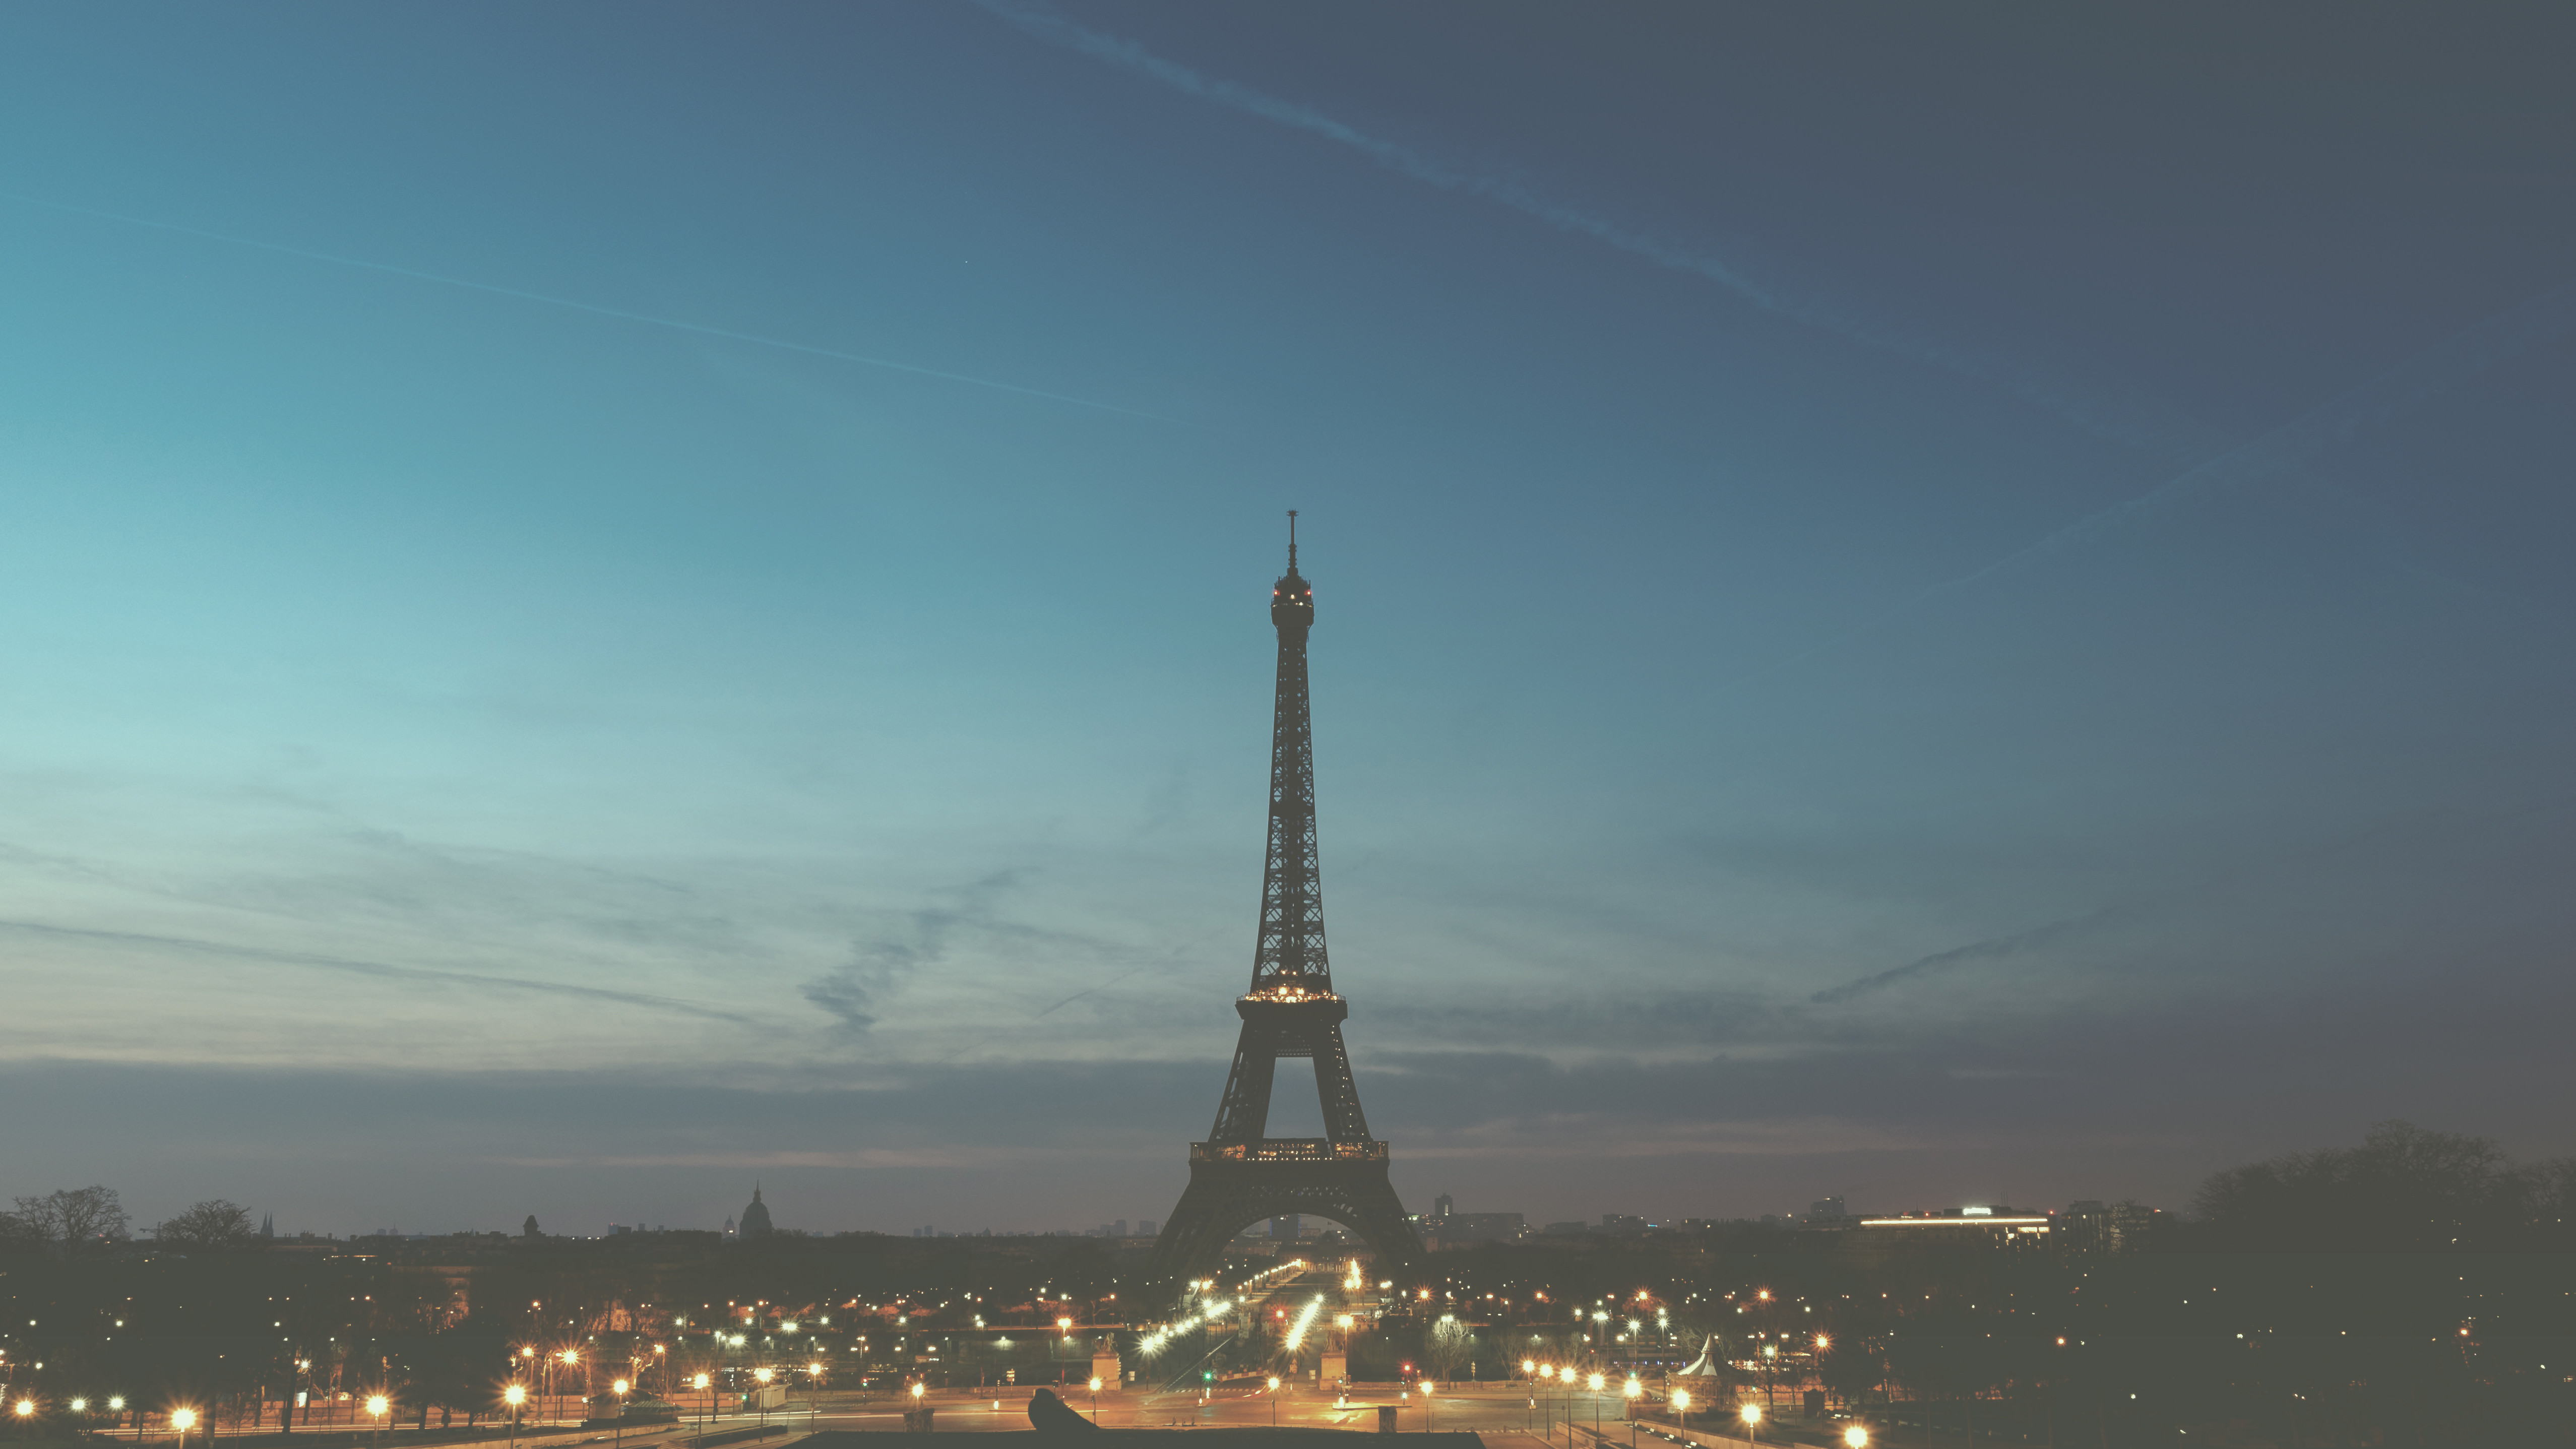 A picture of the Eiffel Tower